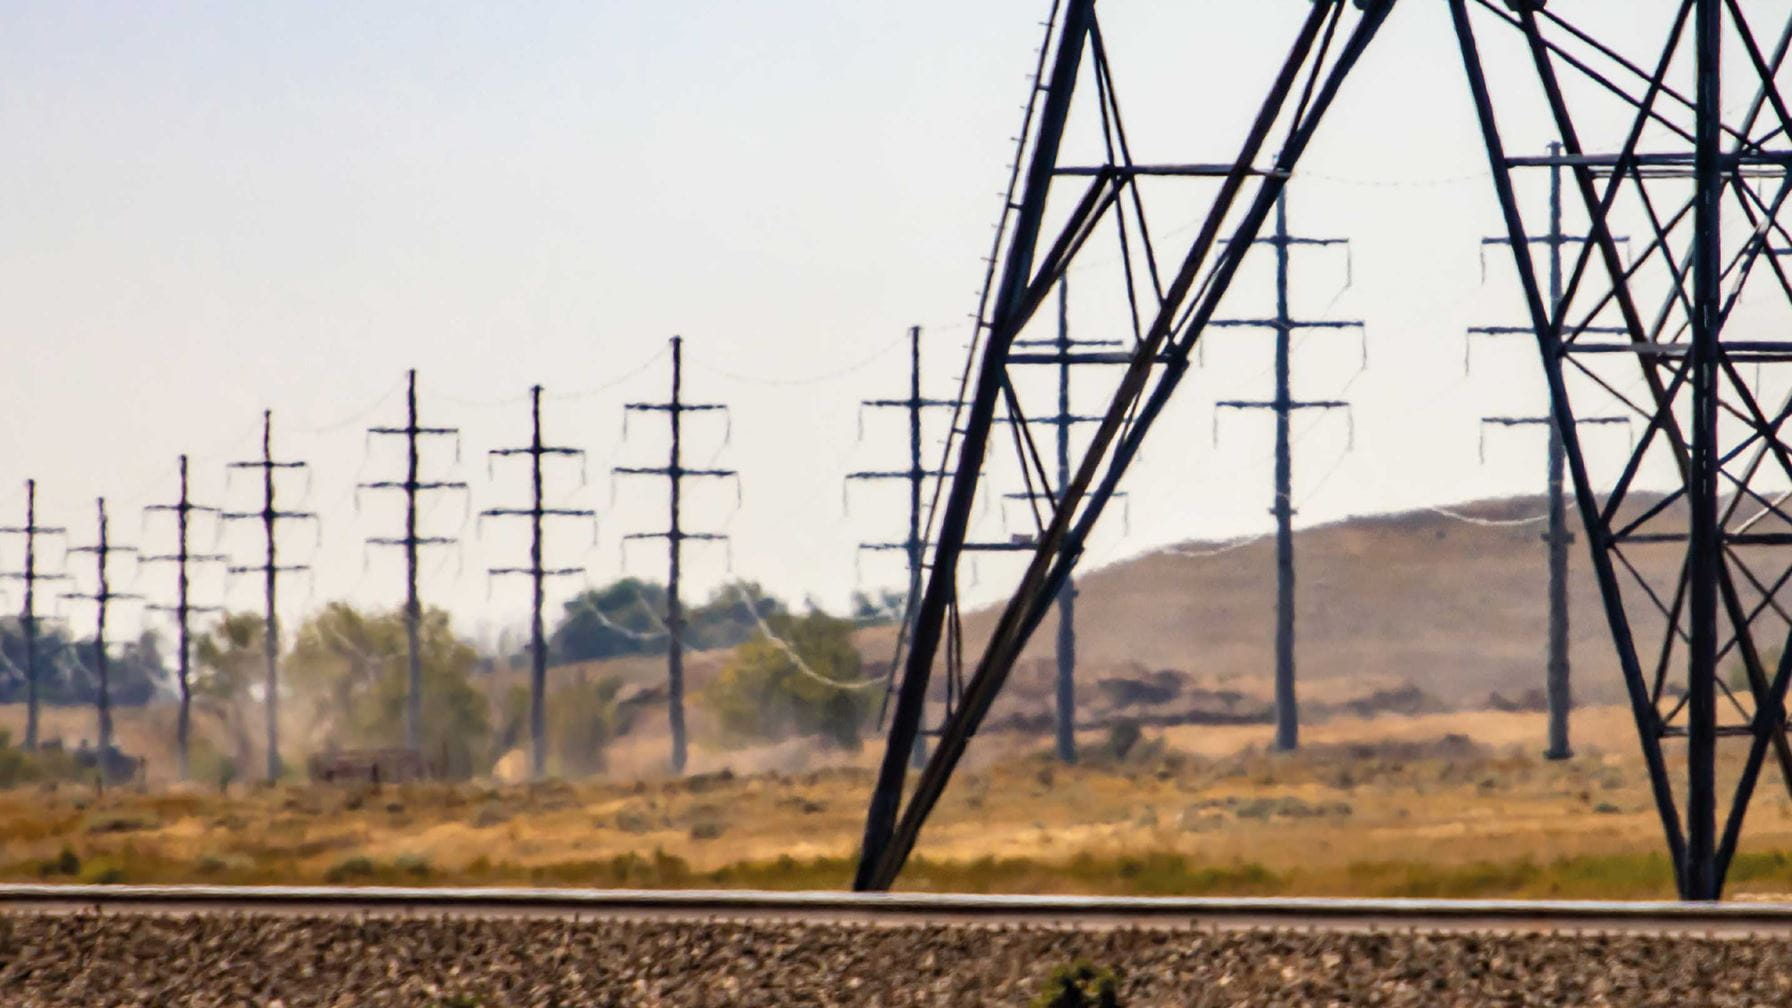  Helping T&D companies realize capital quicker and expedite grid improvements